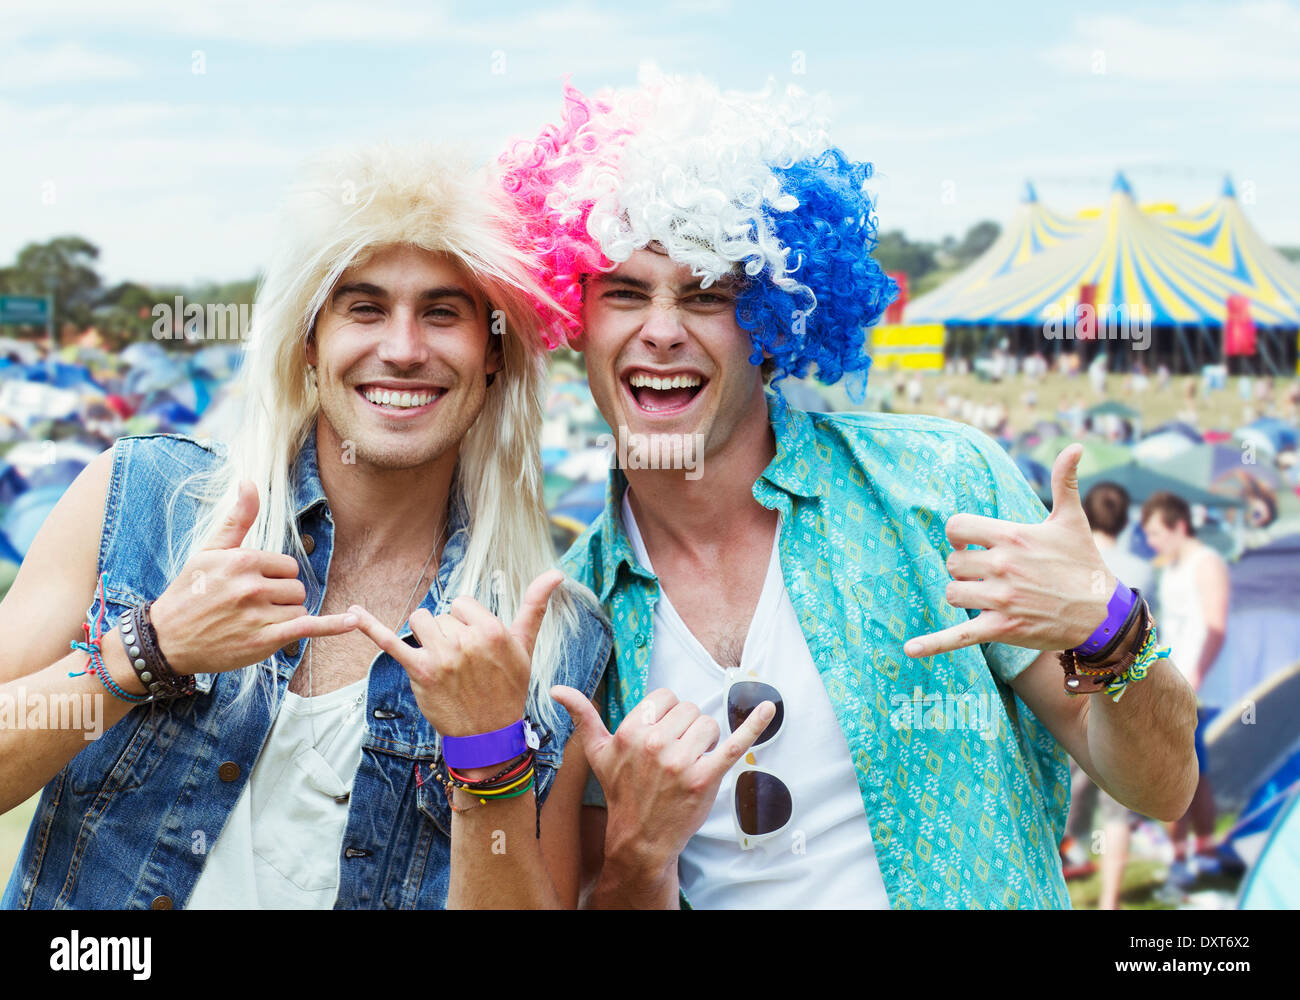 Portrait of men in wigs gesturing at music festival Stock Photo